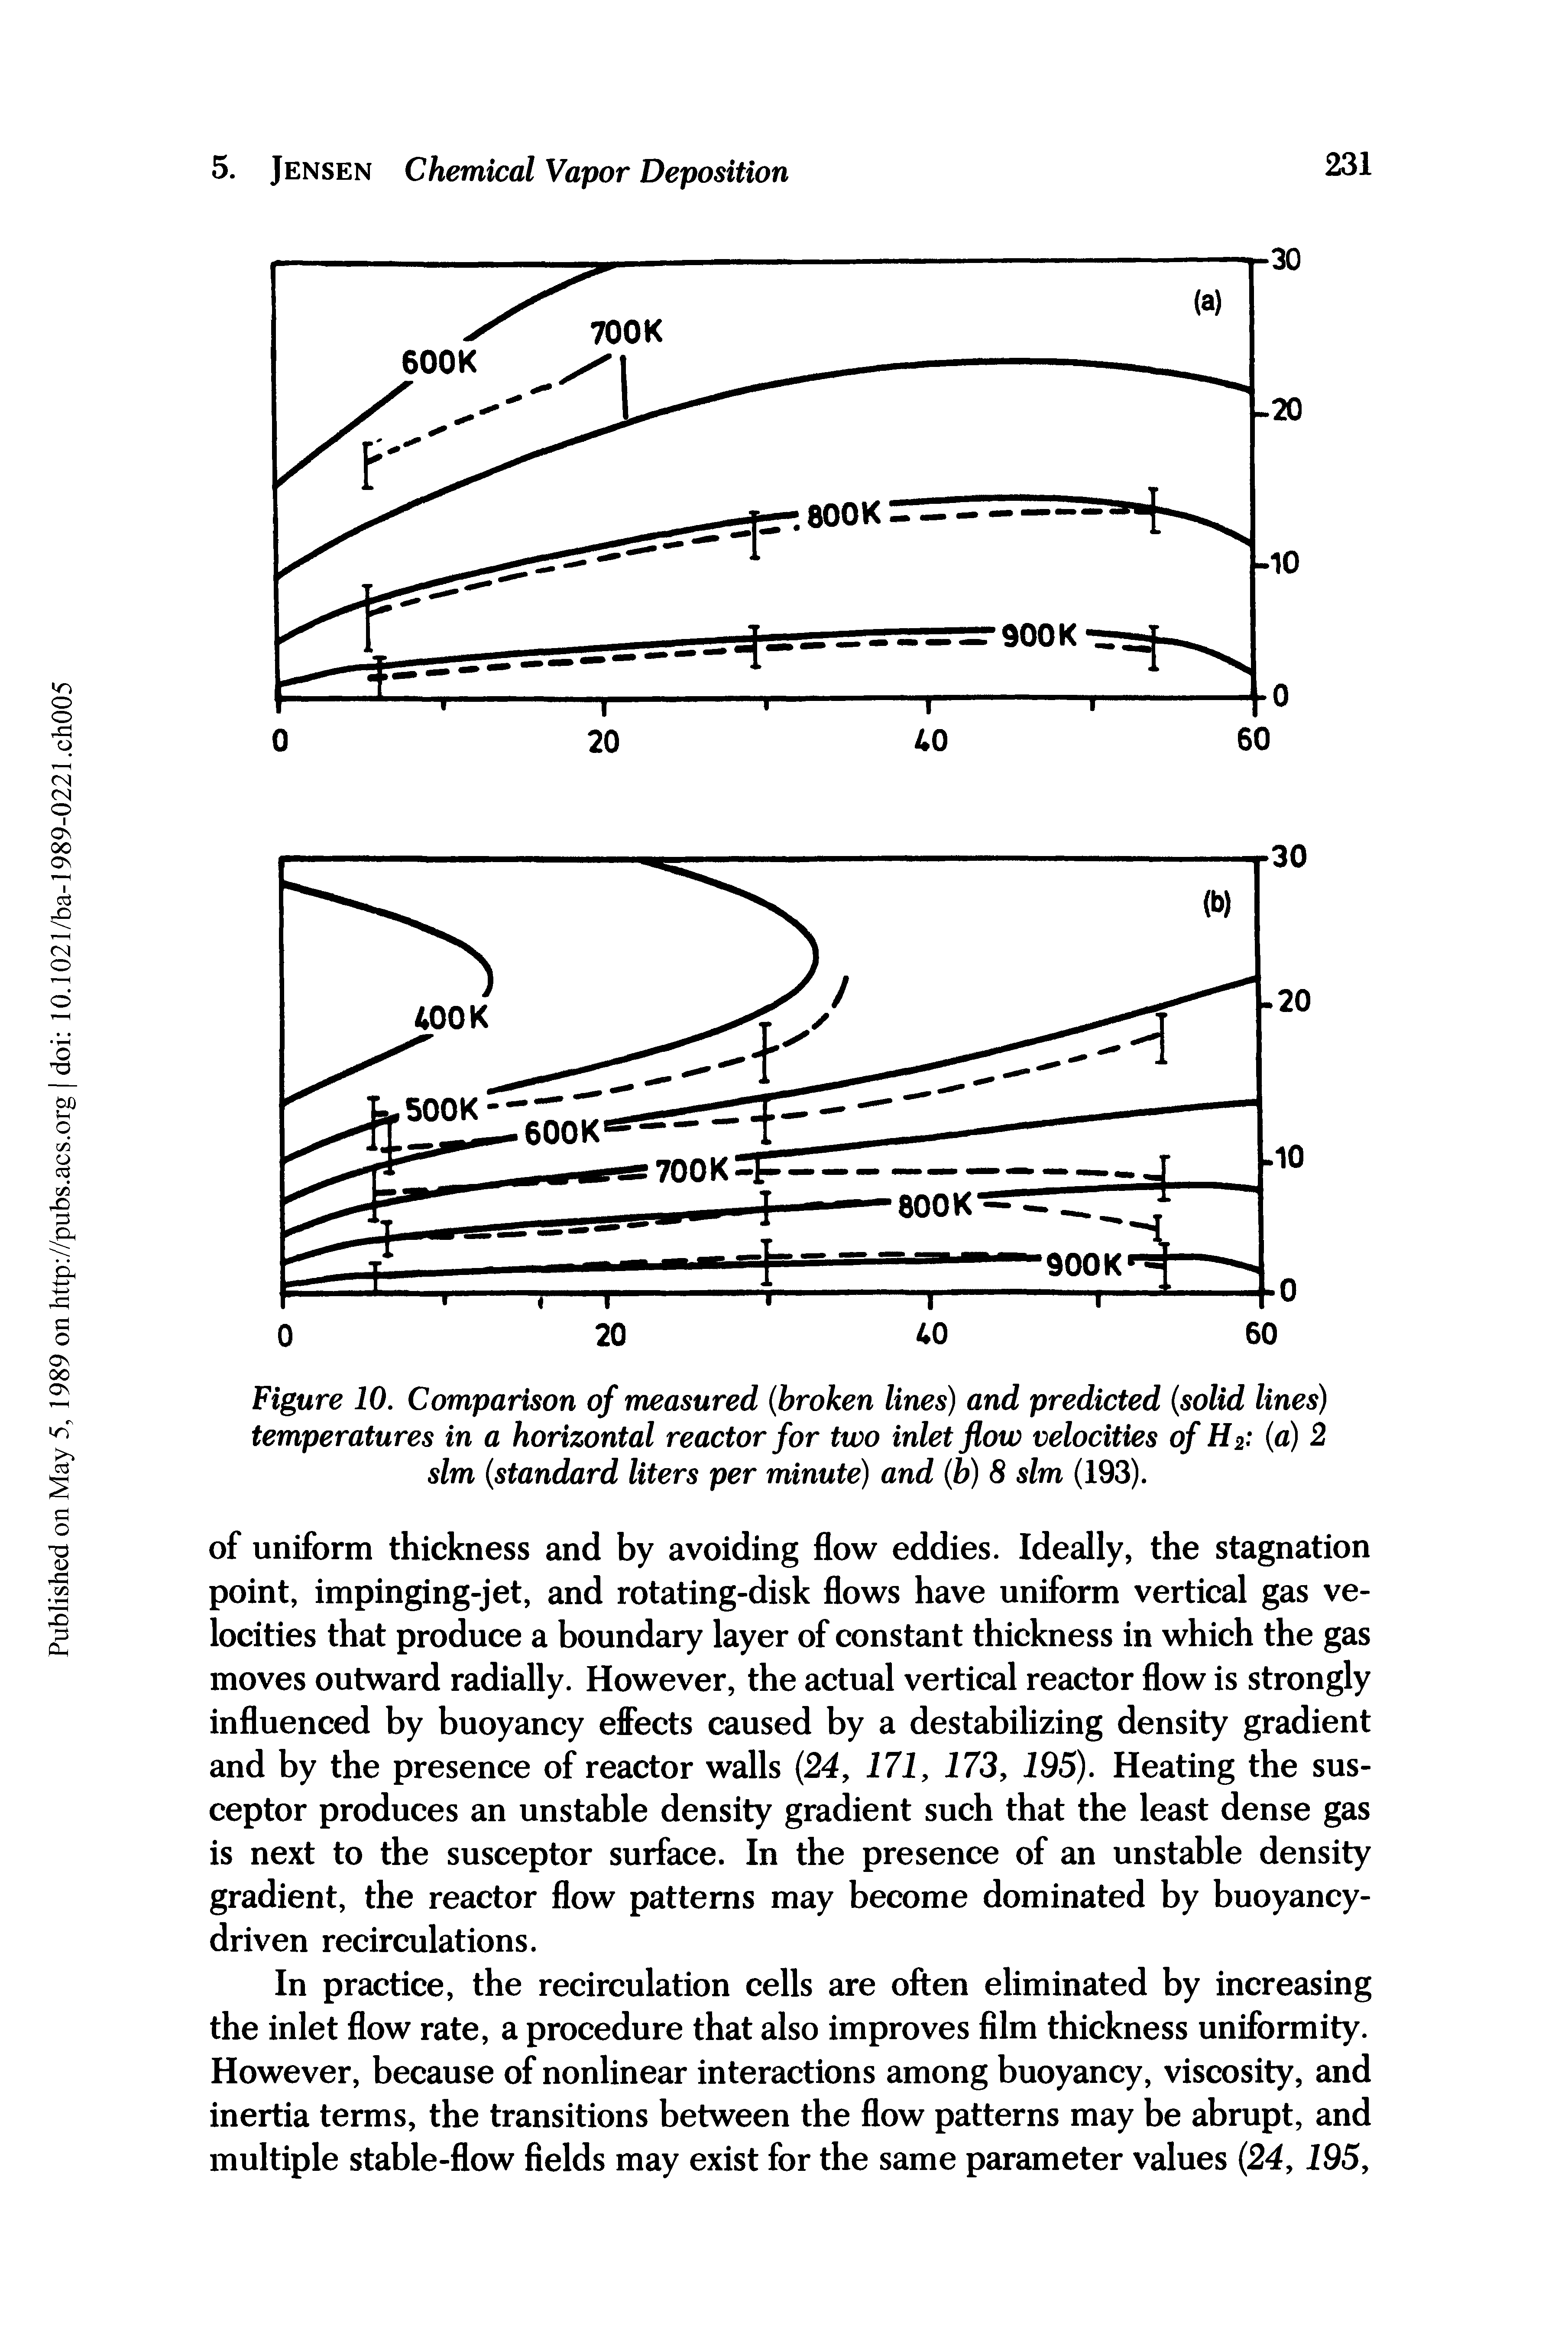 Figure 10. Comparison of measured (broken lines) and predicted (solid lines) temperatures in a horizontal reactor for two inlet flow velocities of H2 (a) 2 slm (standard liters per minute) and (b) 8 slm (193).